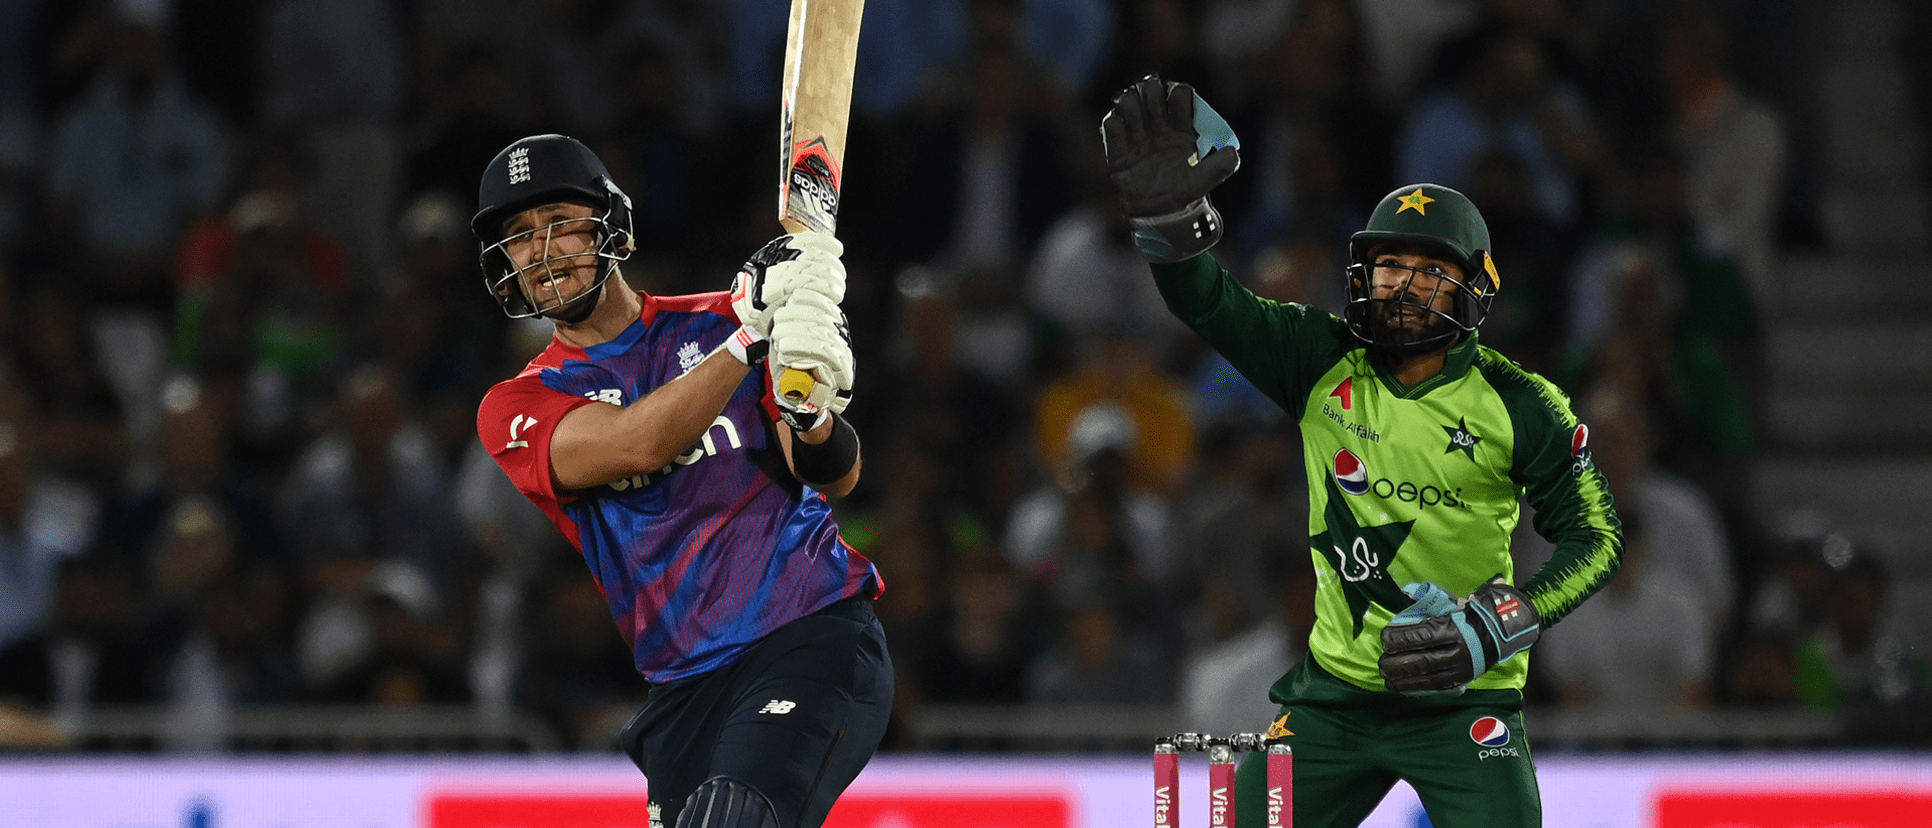 Liam Livingstone's brilliant century was not enough in the first T20I